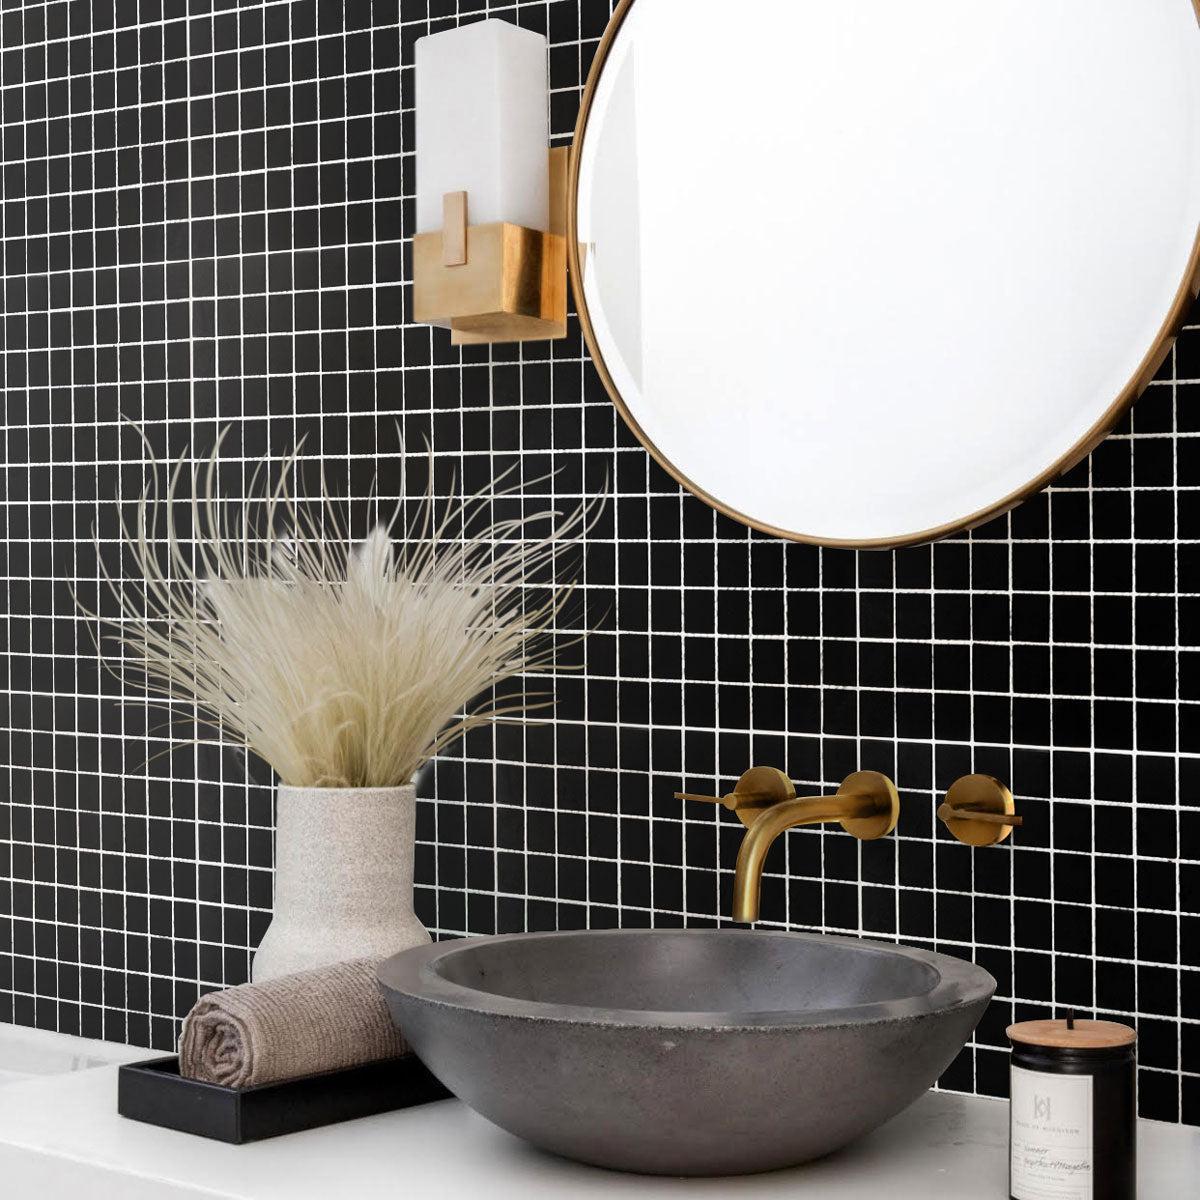 The Glacier Black Frosted Glass Tile creates a bold and dramatic aesthetic